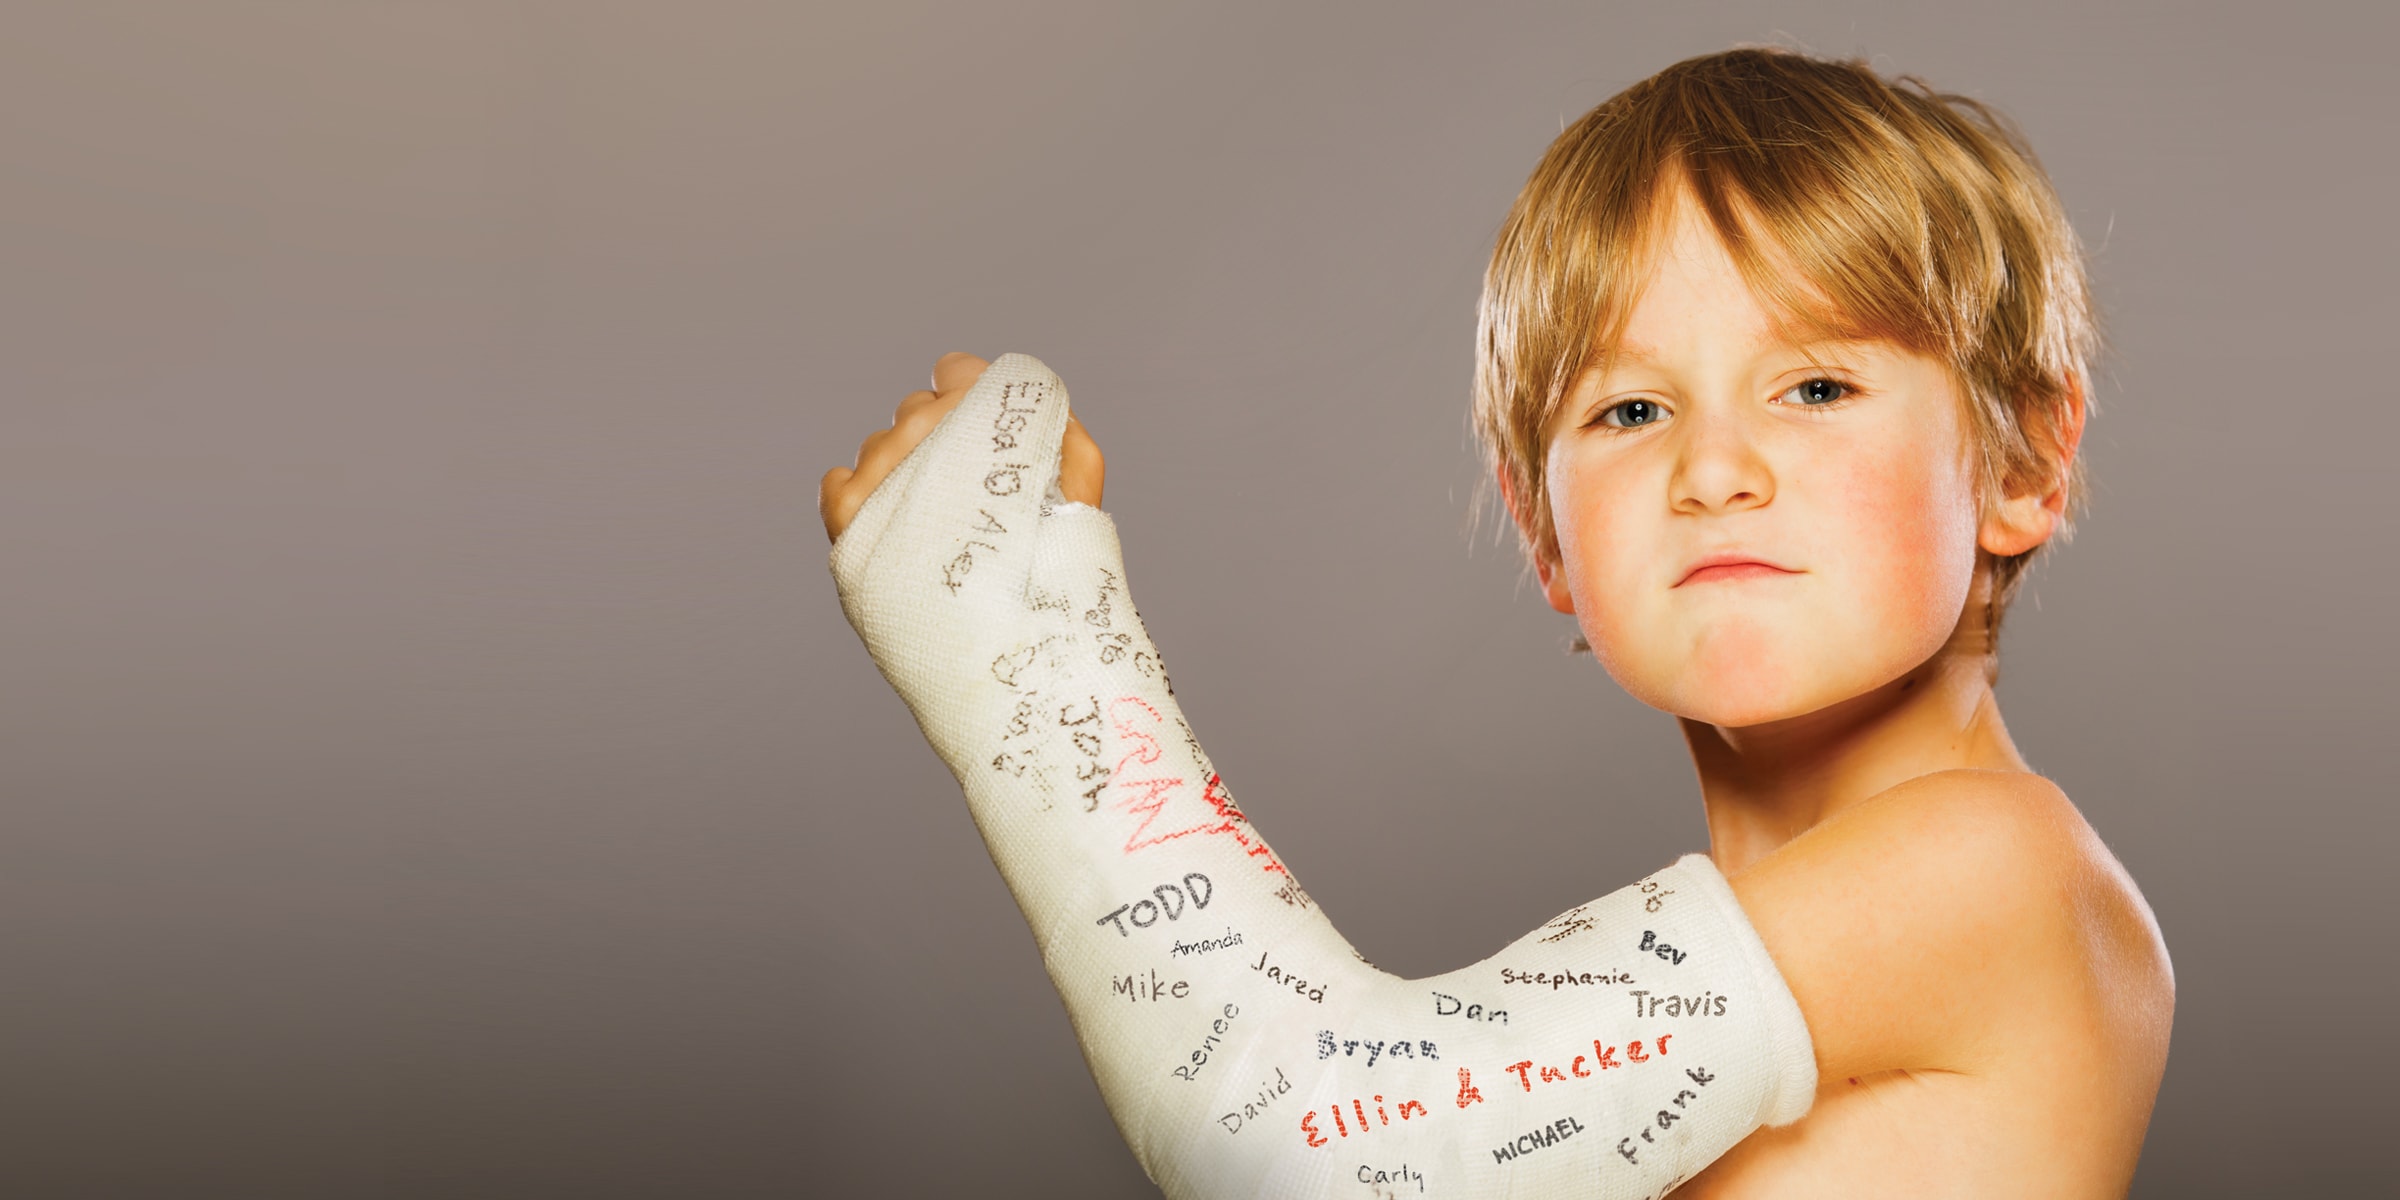 Blonde haired child making a determined face while holding up his left arm in a signed white cast.